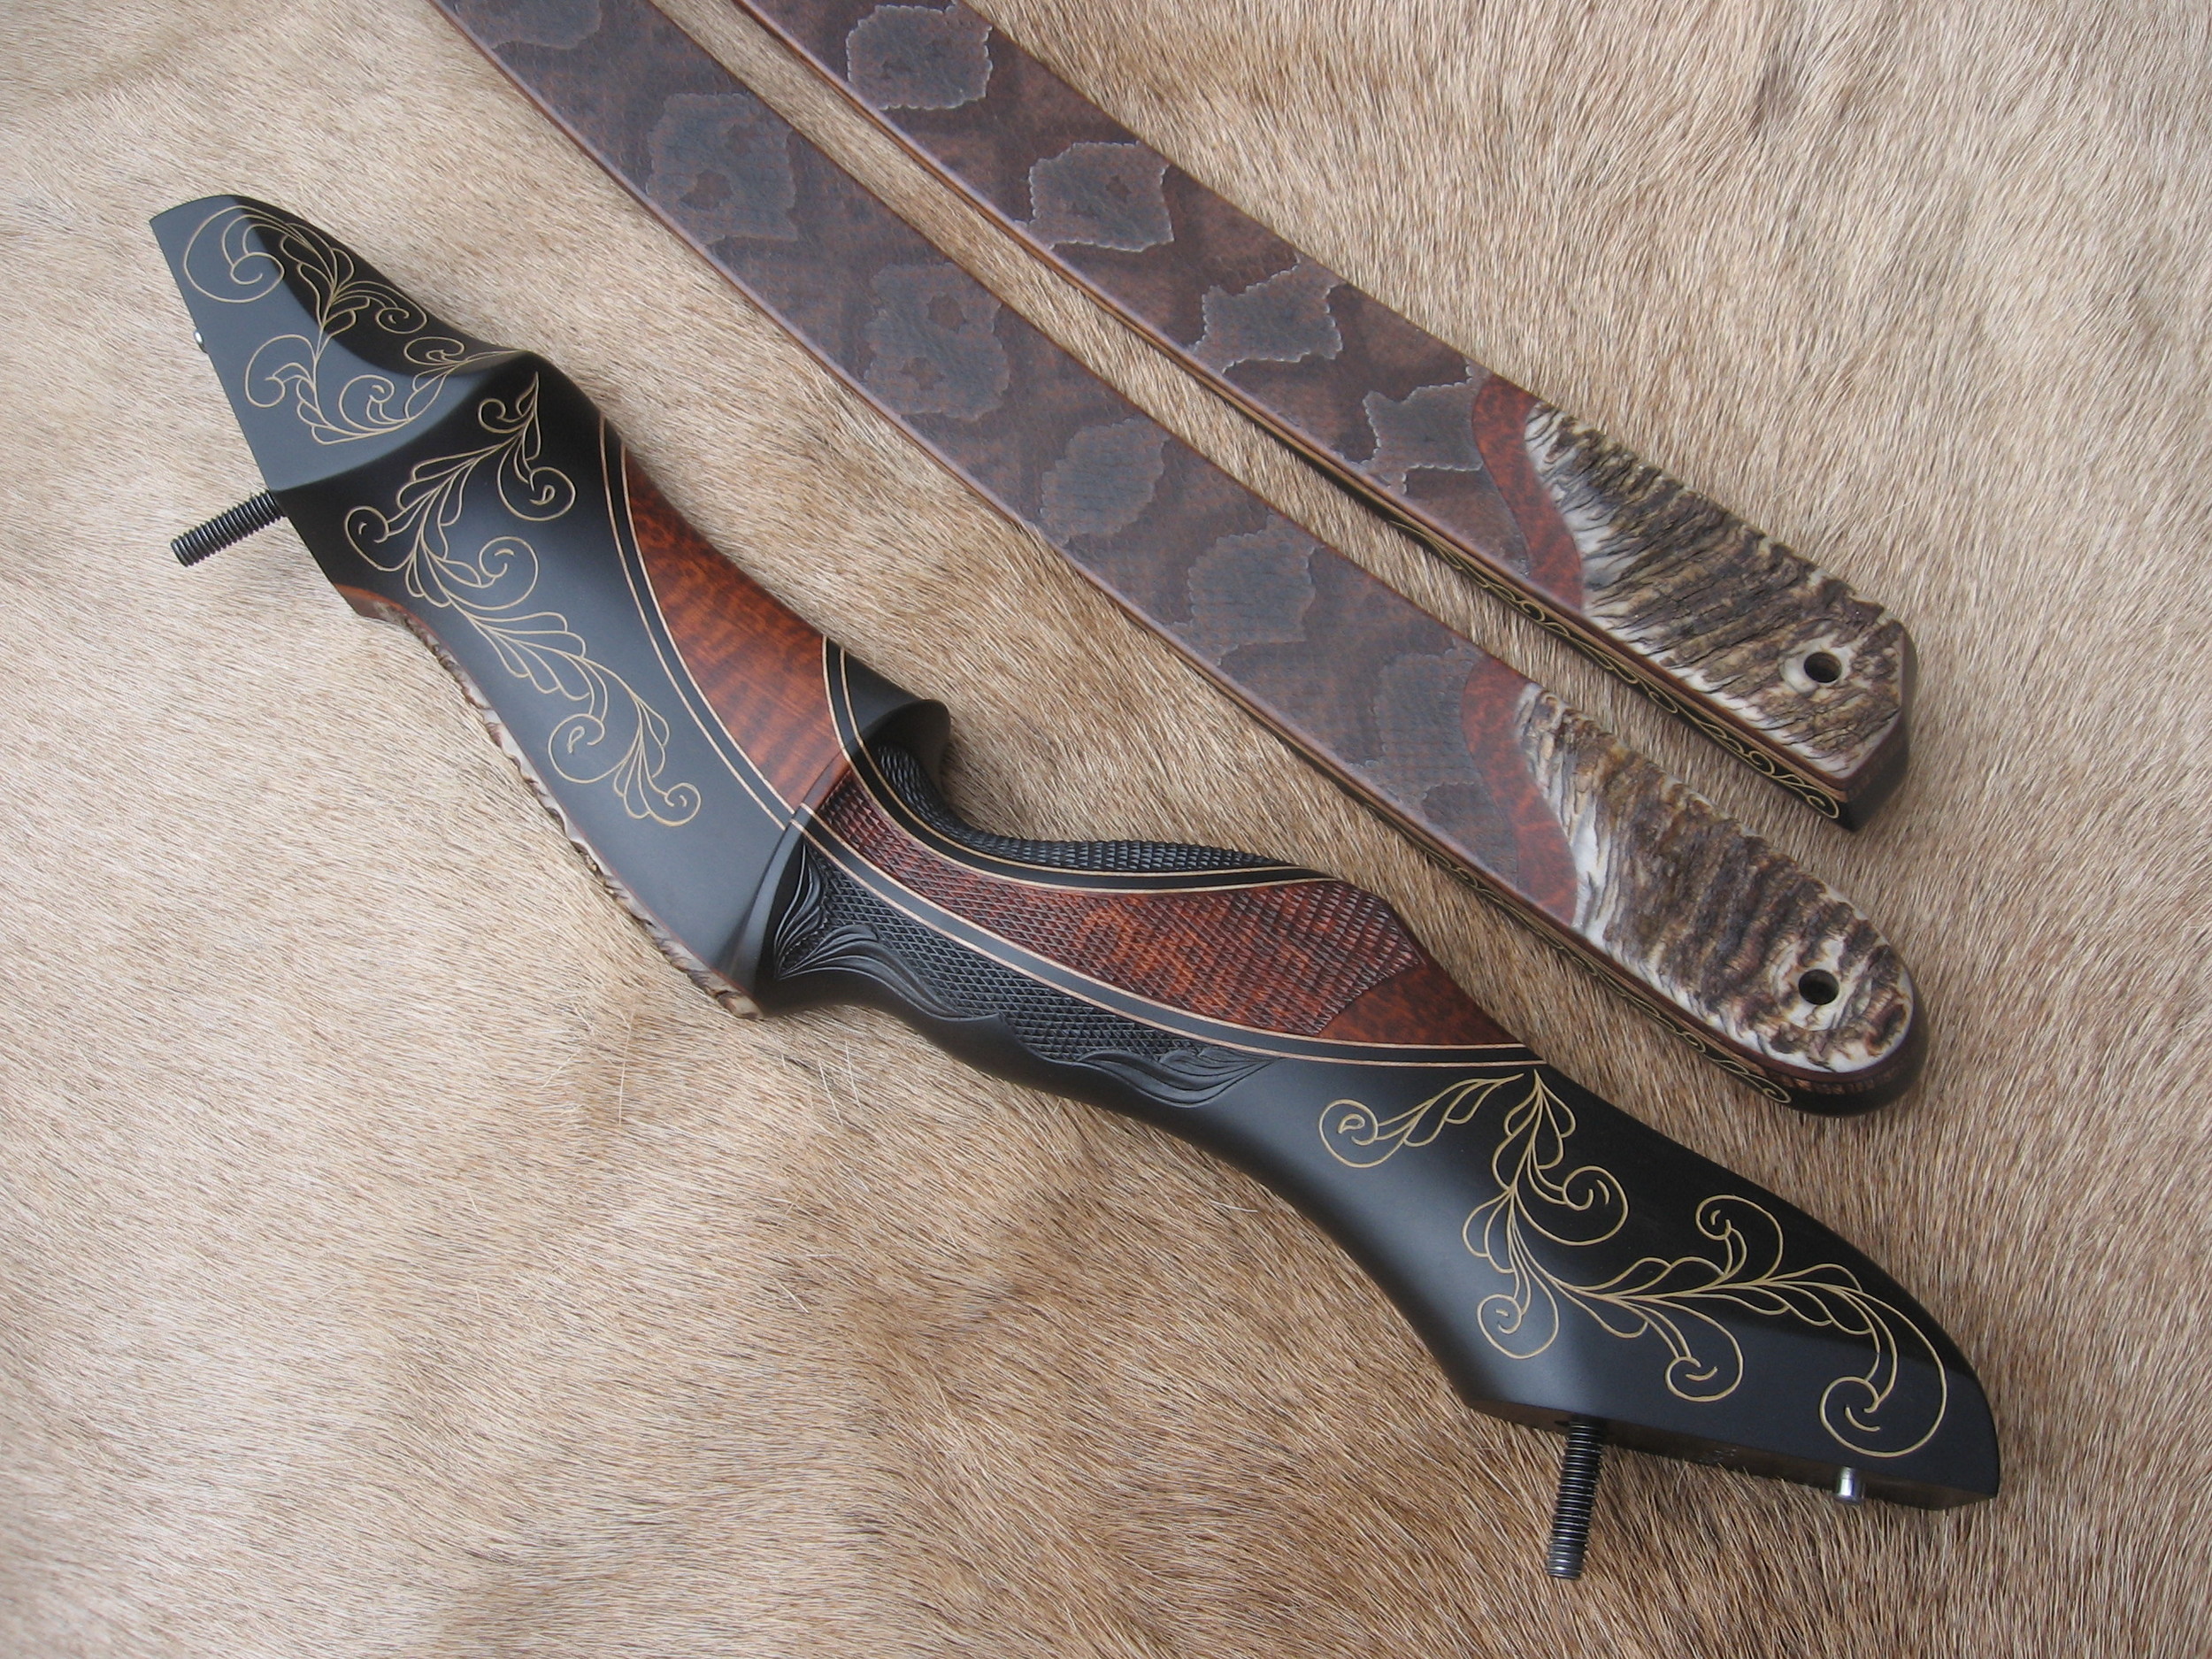  Gaboon Riser, snakewood crescent, hand carved scrolling. Call or e-mail for quote. 